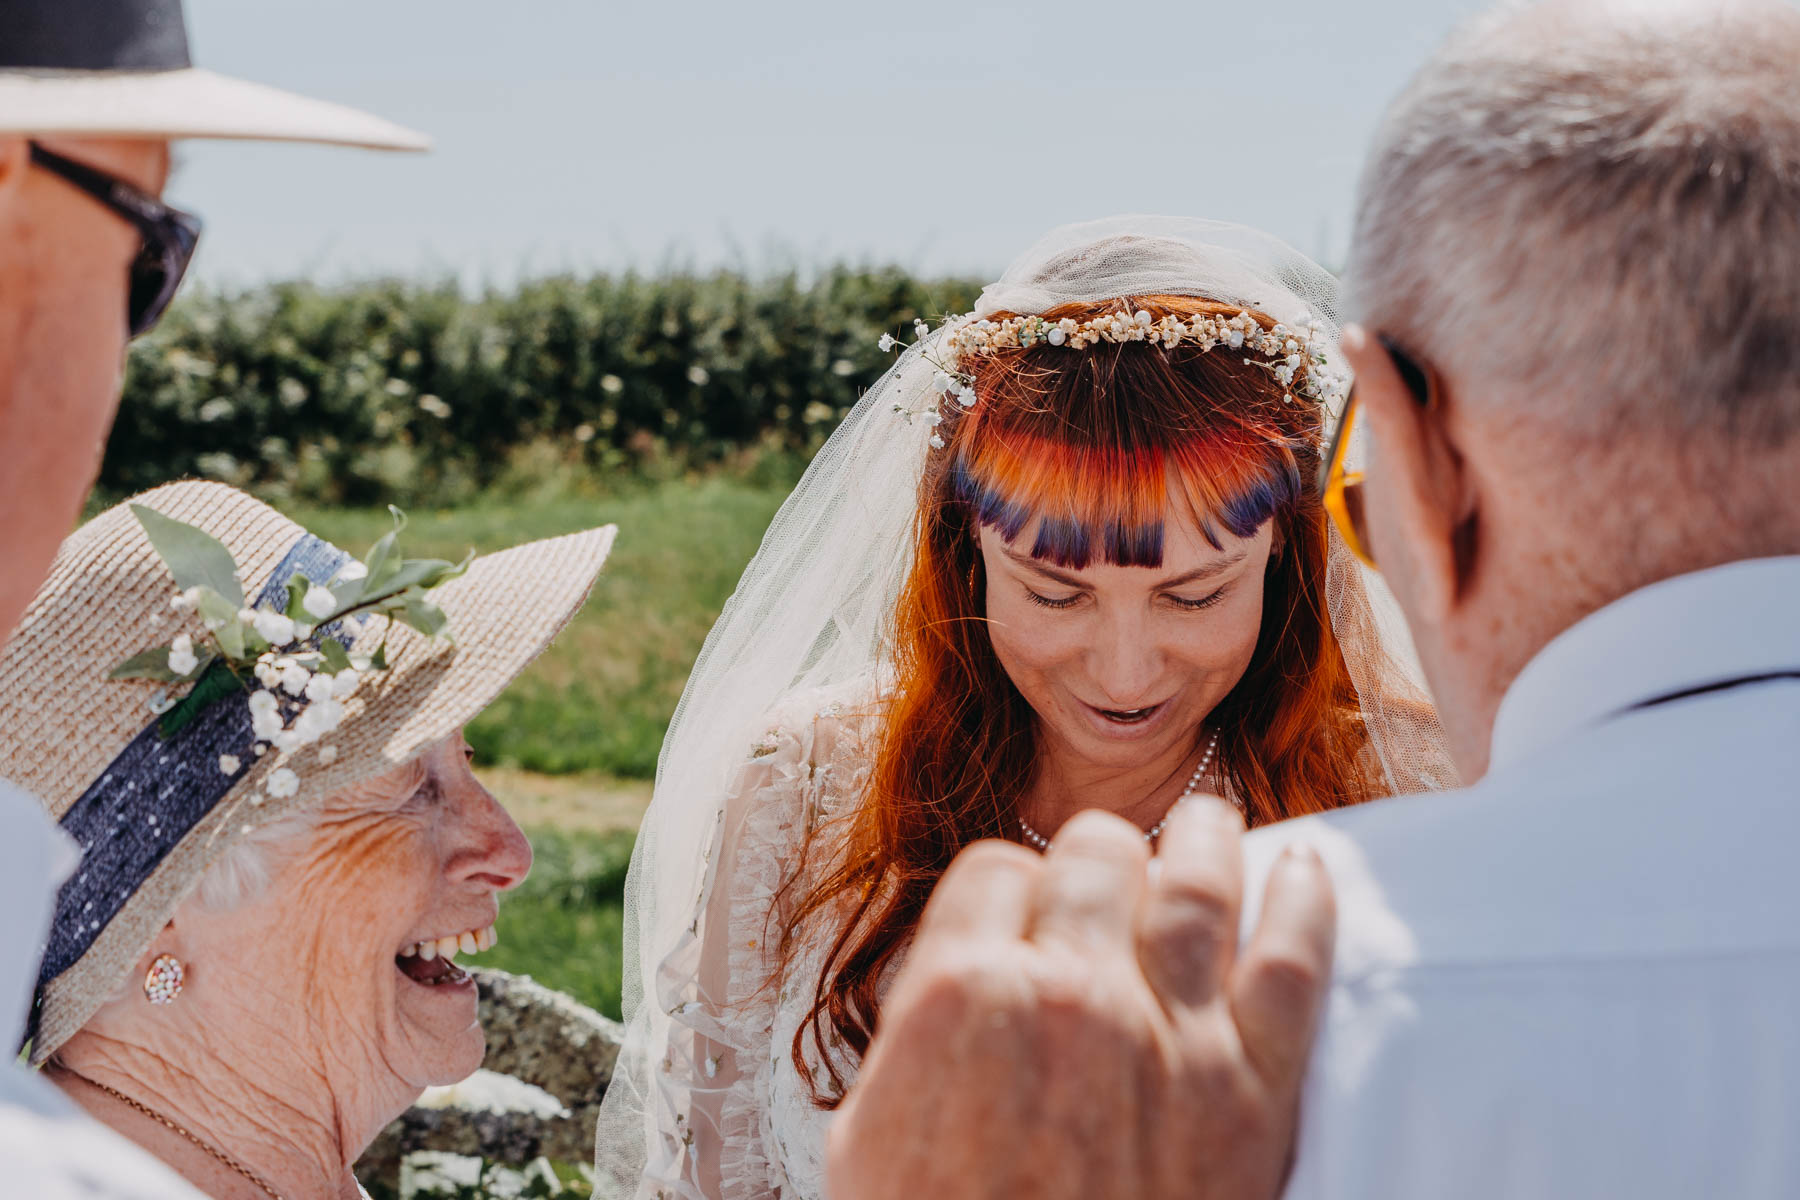 The bride, her grandfather and her smiling grandmother